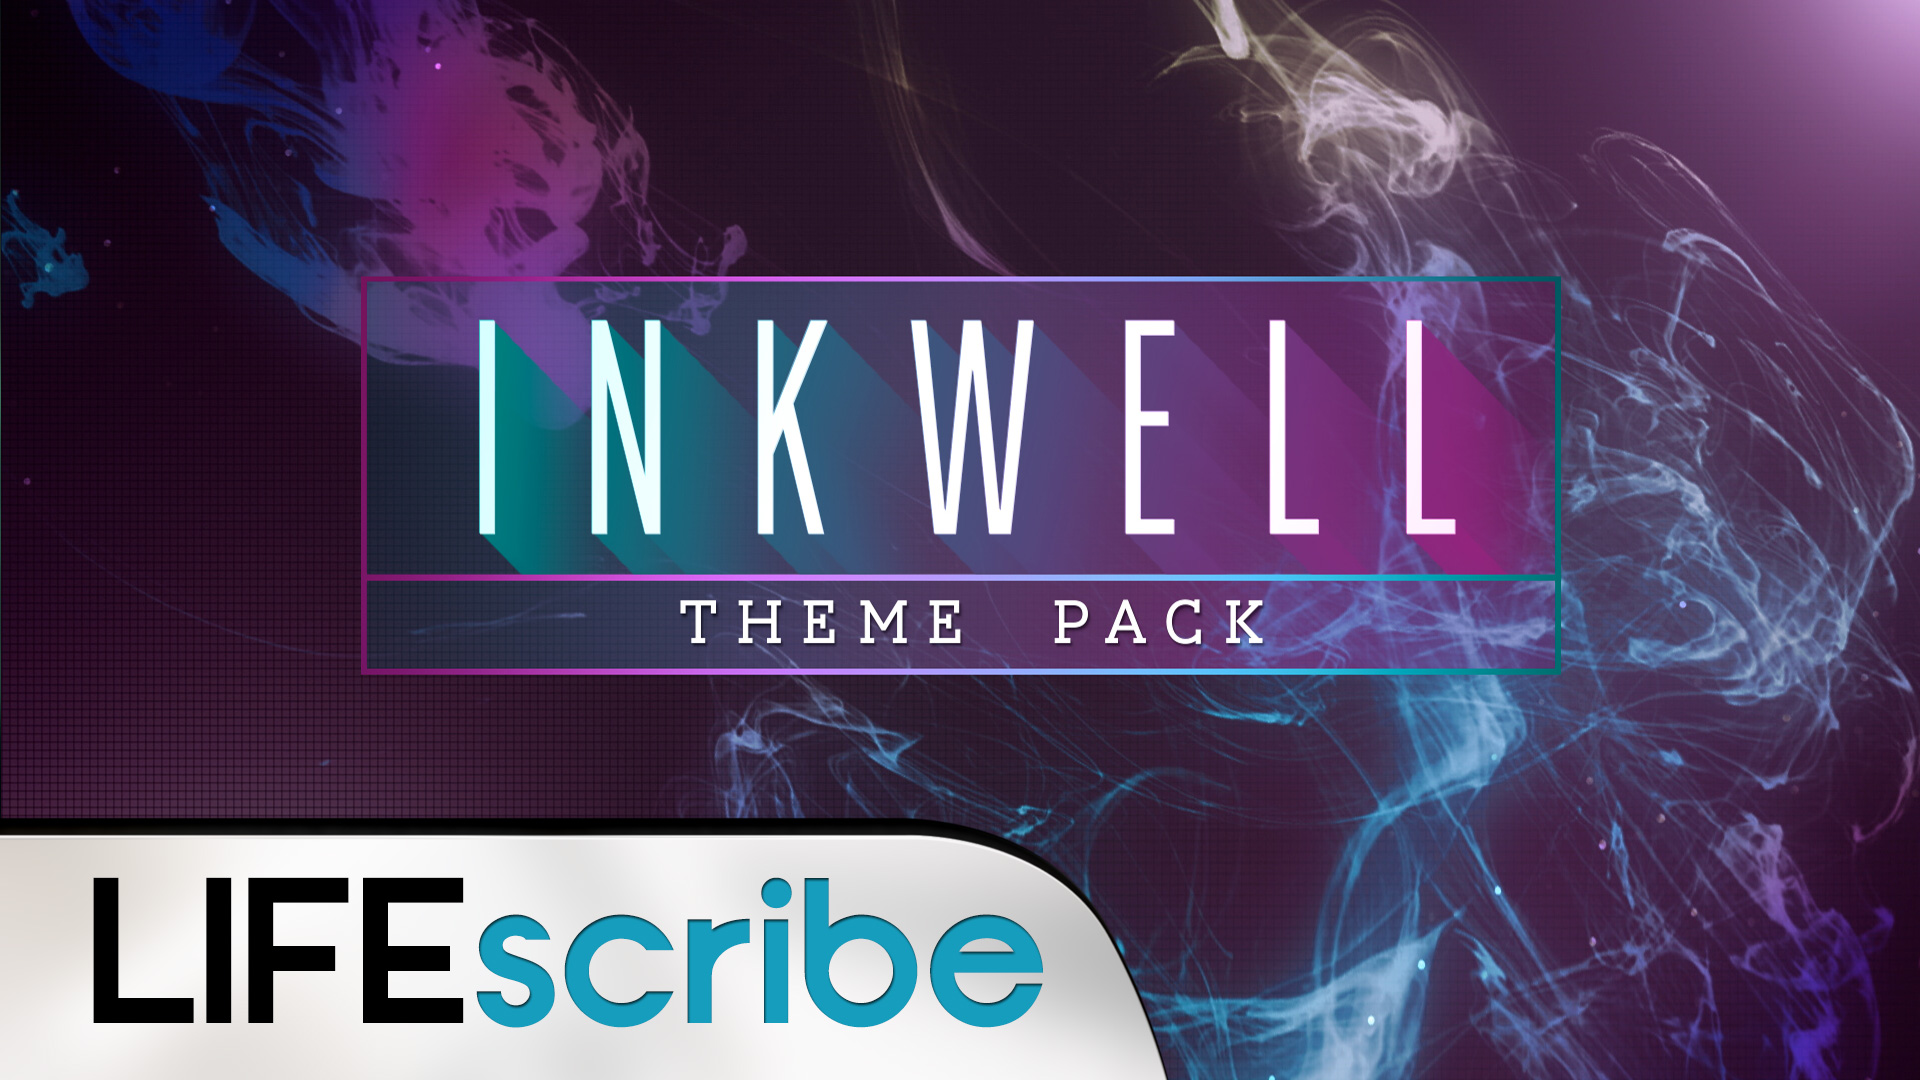 Inkwell Theme Pack